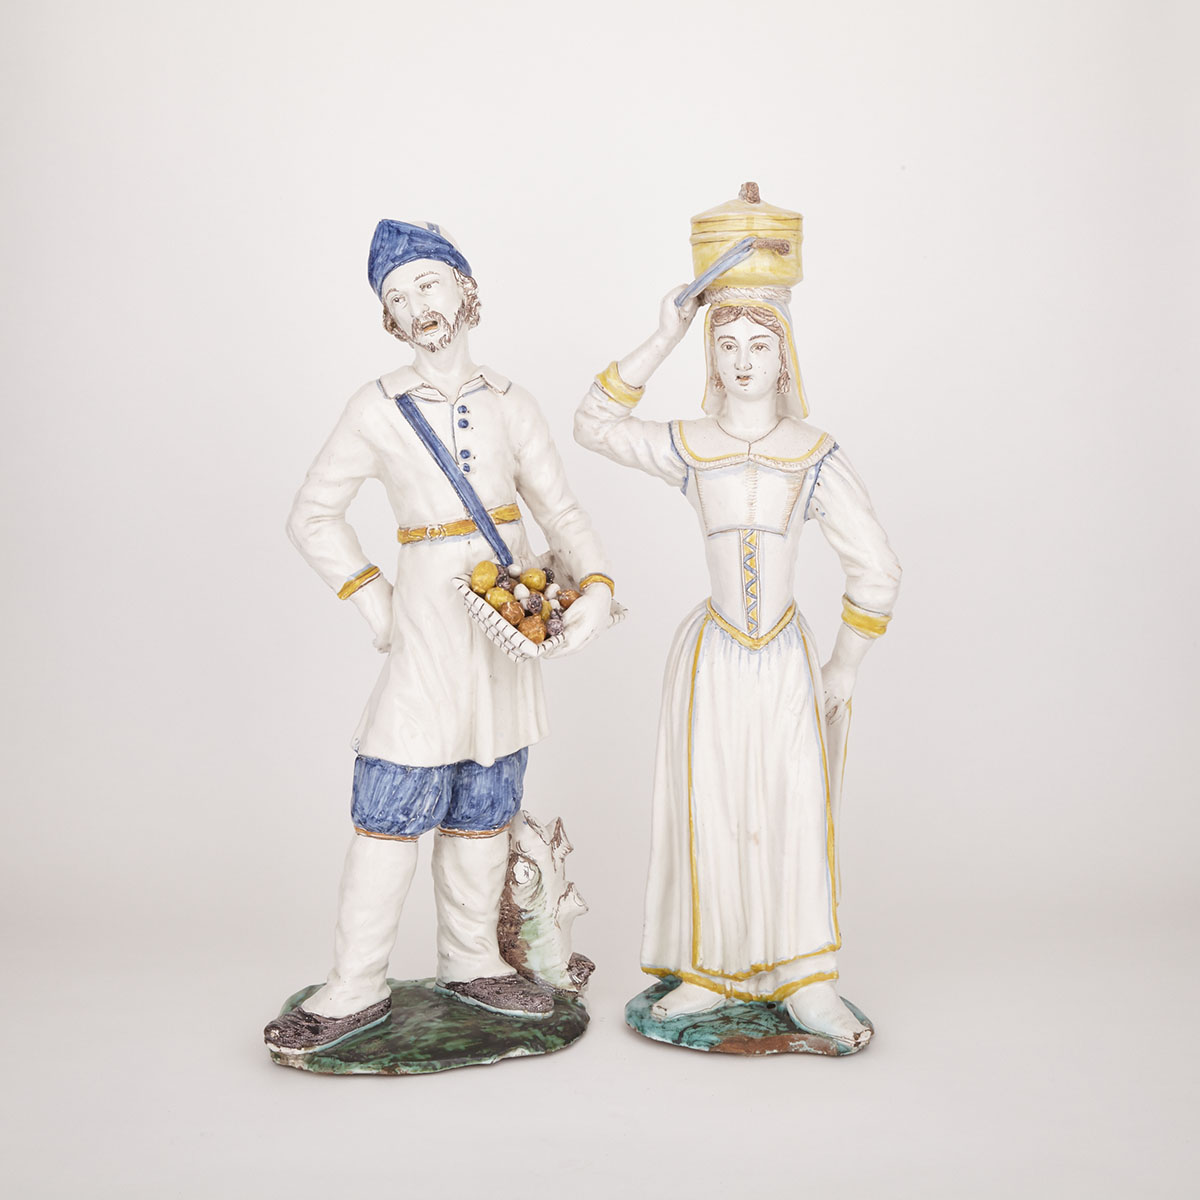 Pair of French Faience Figures of Peasant Street Vendors, probably Nevers, 17th century